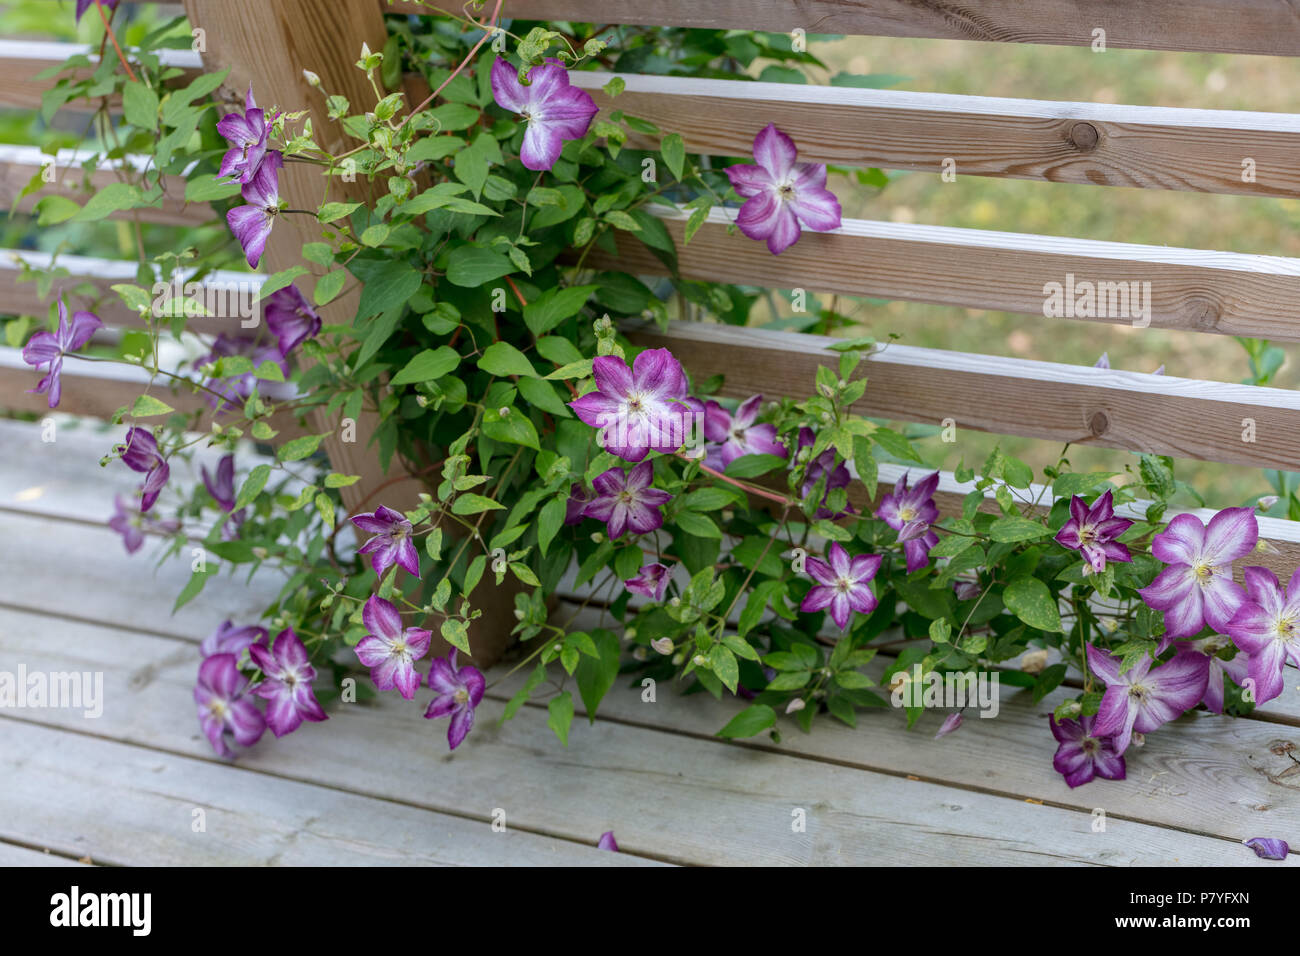 'Pernille' Purple clematis, Italiensk klematis (Clematis viticella) Stock Photo